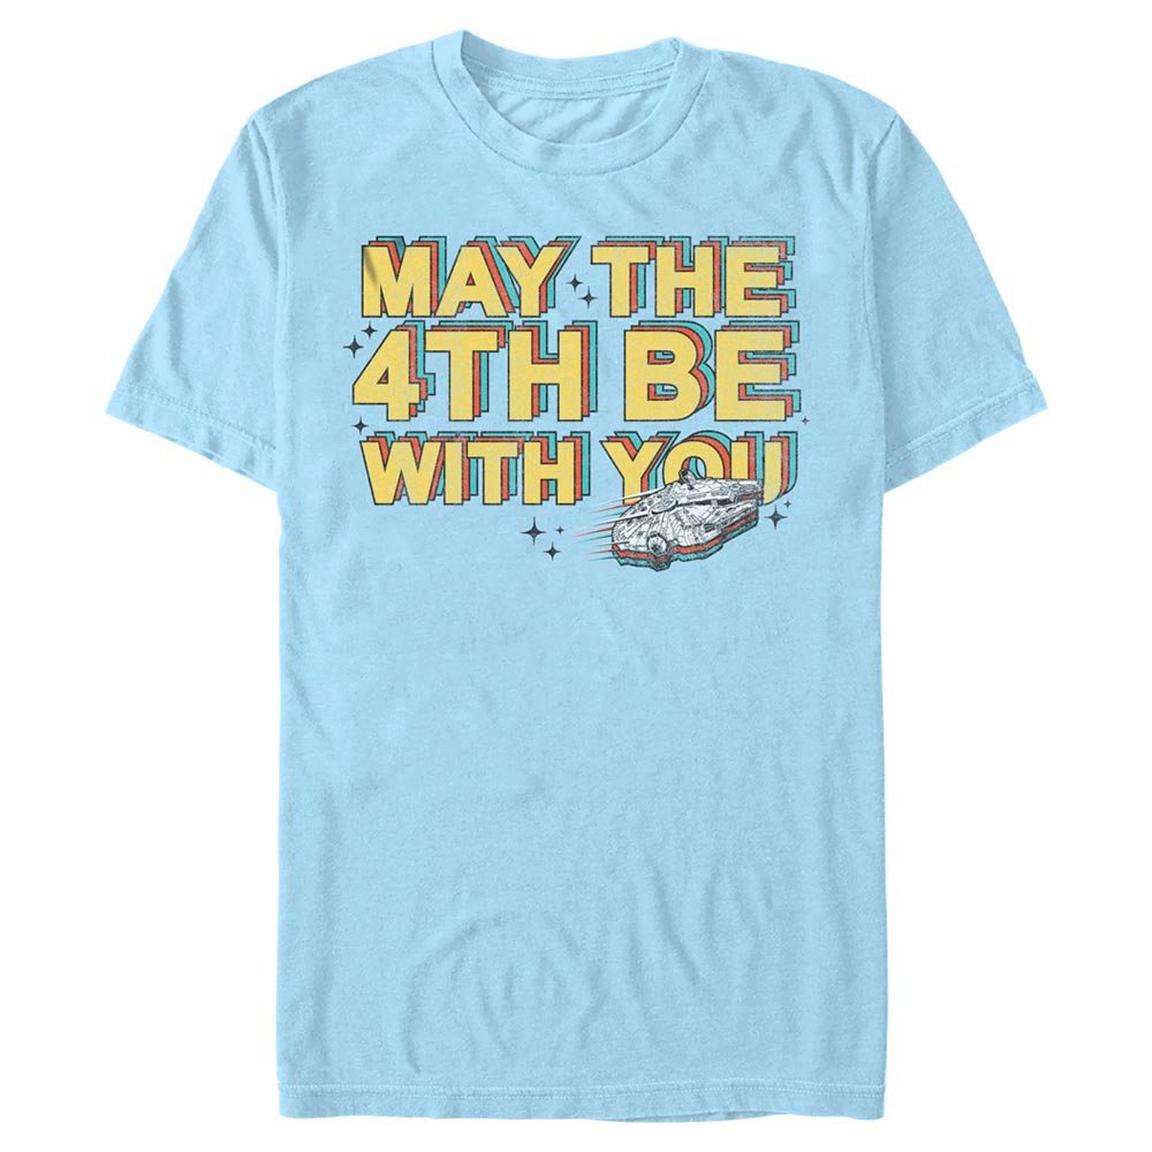 Star Wars May the 4th Be With You Millennium Falcon Unisex T-Shirt, Size: Medium, Fifth Sun